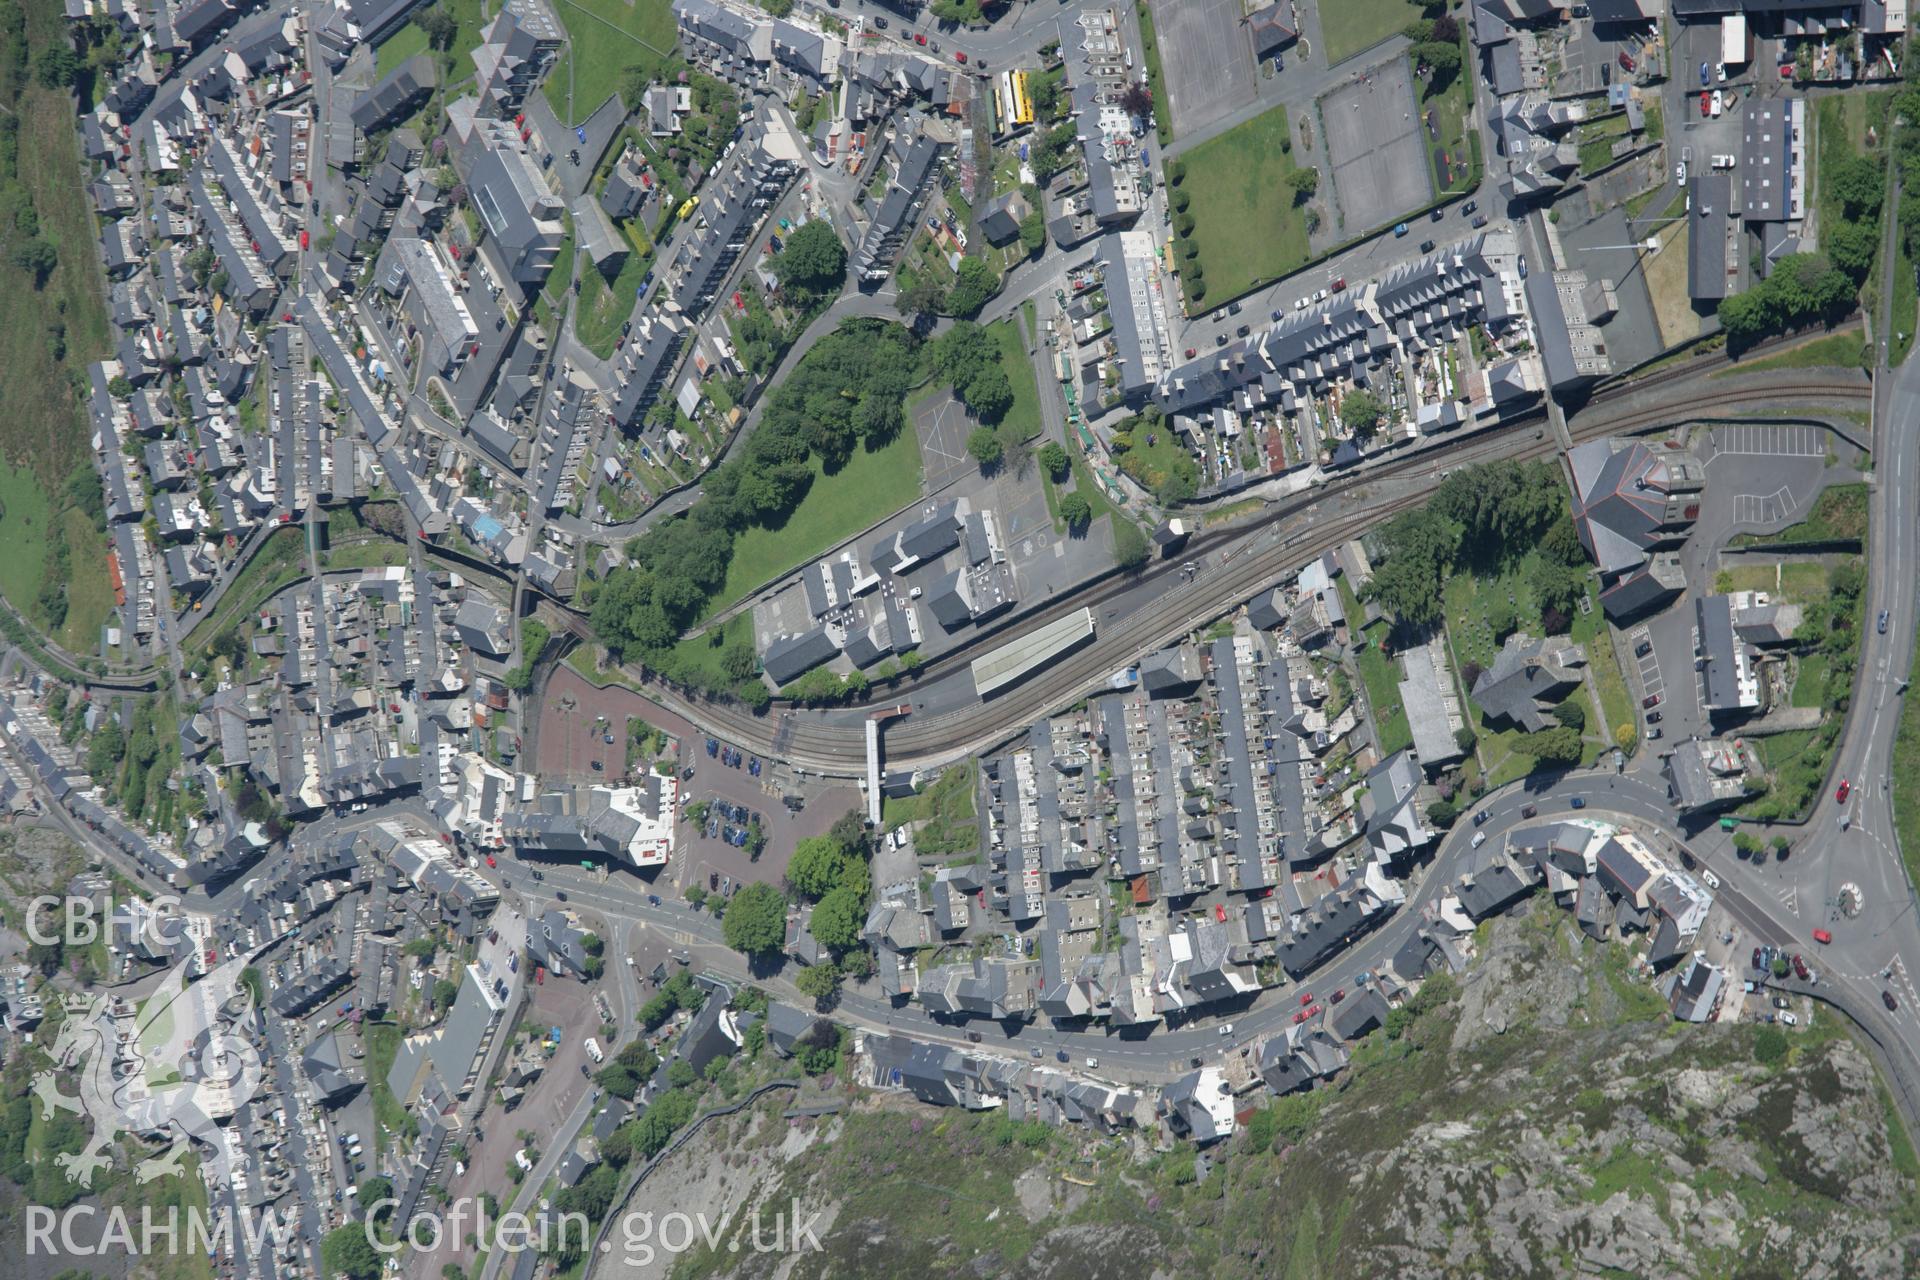 RCAHMW digital colour oblique photograph of Blaenau Ffestiniog viewed from the west. Taken on 08/06/2005 by T.G. Driver.